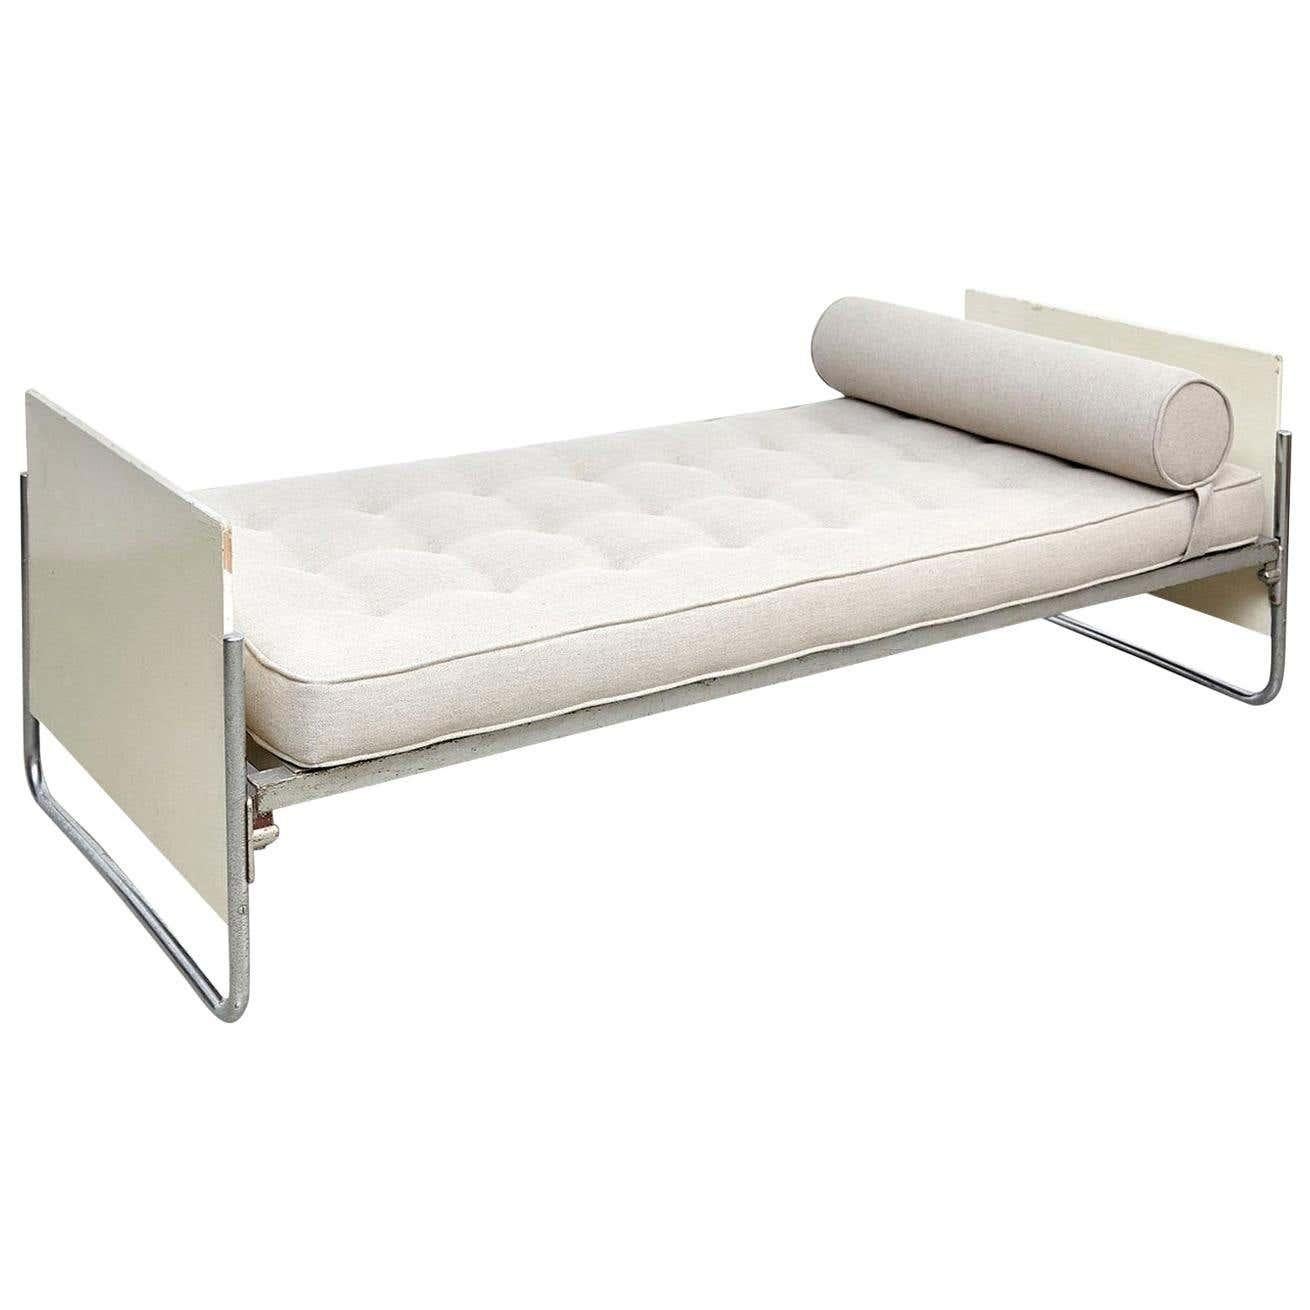 Early Gispen Mid-Century Modern Bauhaus Metal and Plywood Bed, circa 1930 2